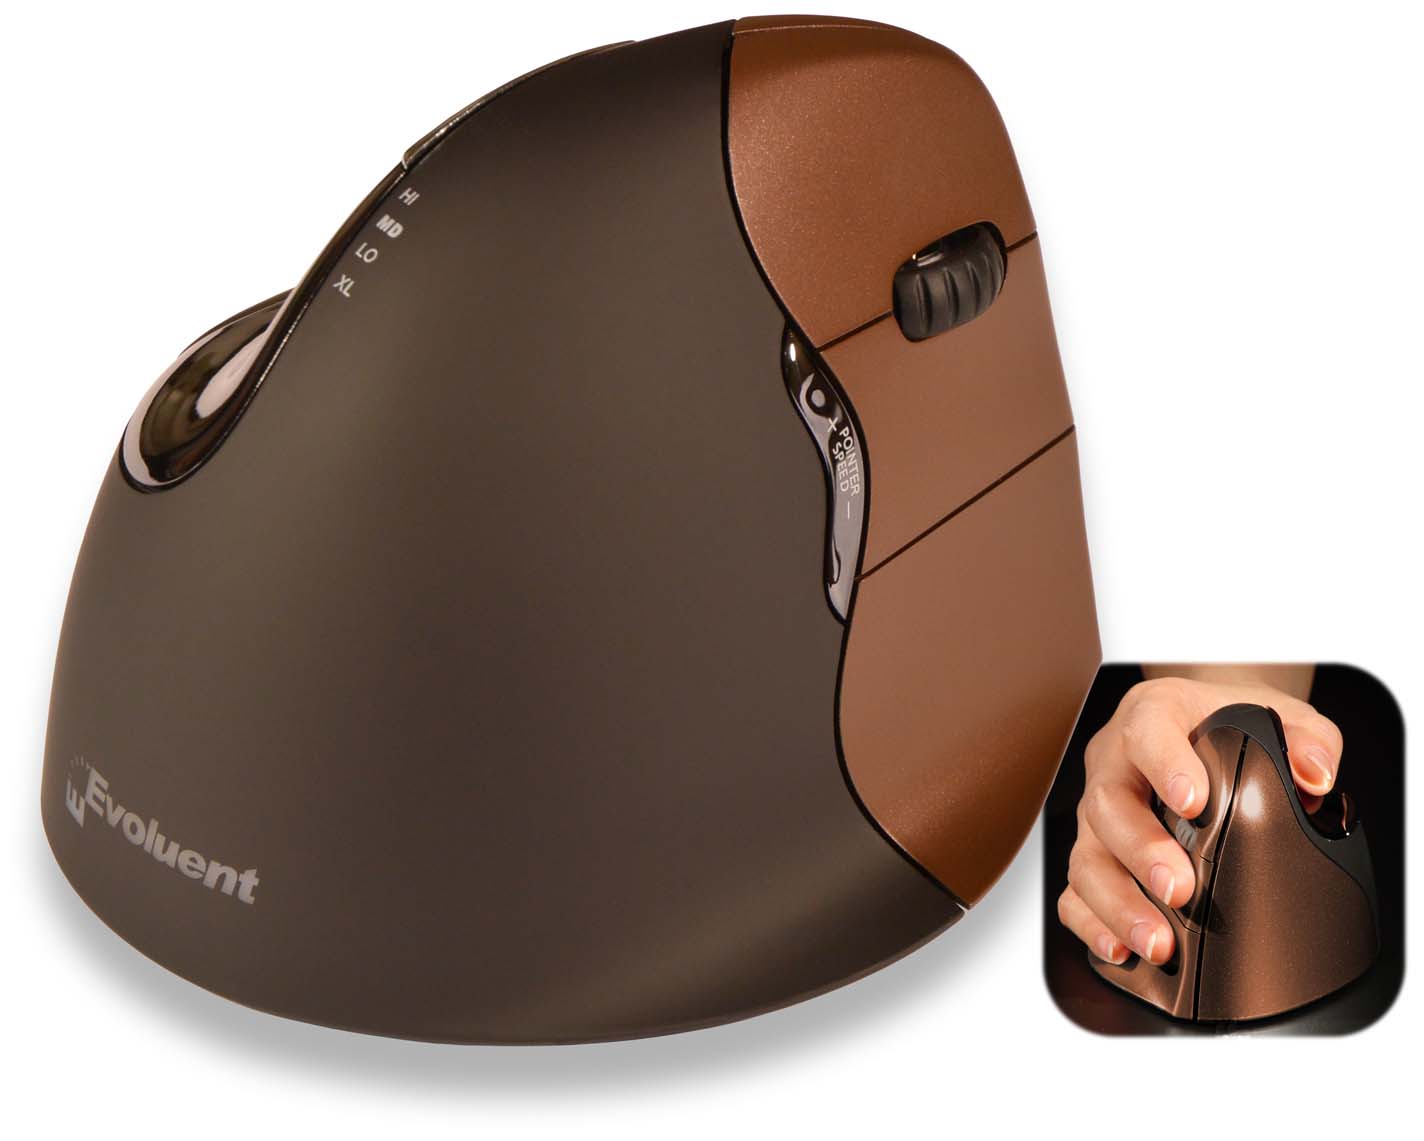 VMOUS4WRSHY EVOLUENT An Evoluent product. Wireless RIGHT HANDED SMALL Evoluent VerticalMouse. Patented vertical mouse supports your hand in a relaxed handshake position- and eliminates the arm twisting required by ordinary mice. The 4 is the latest evolution of this award win